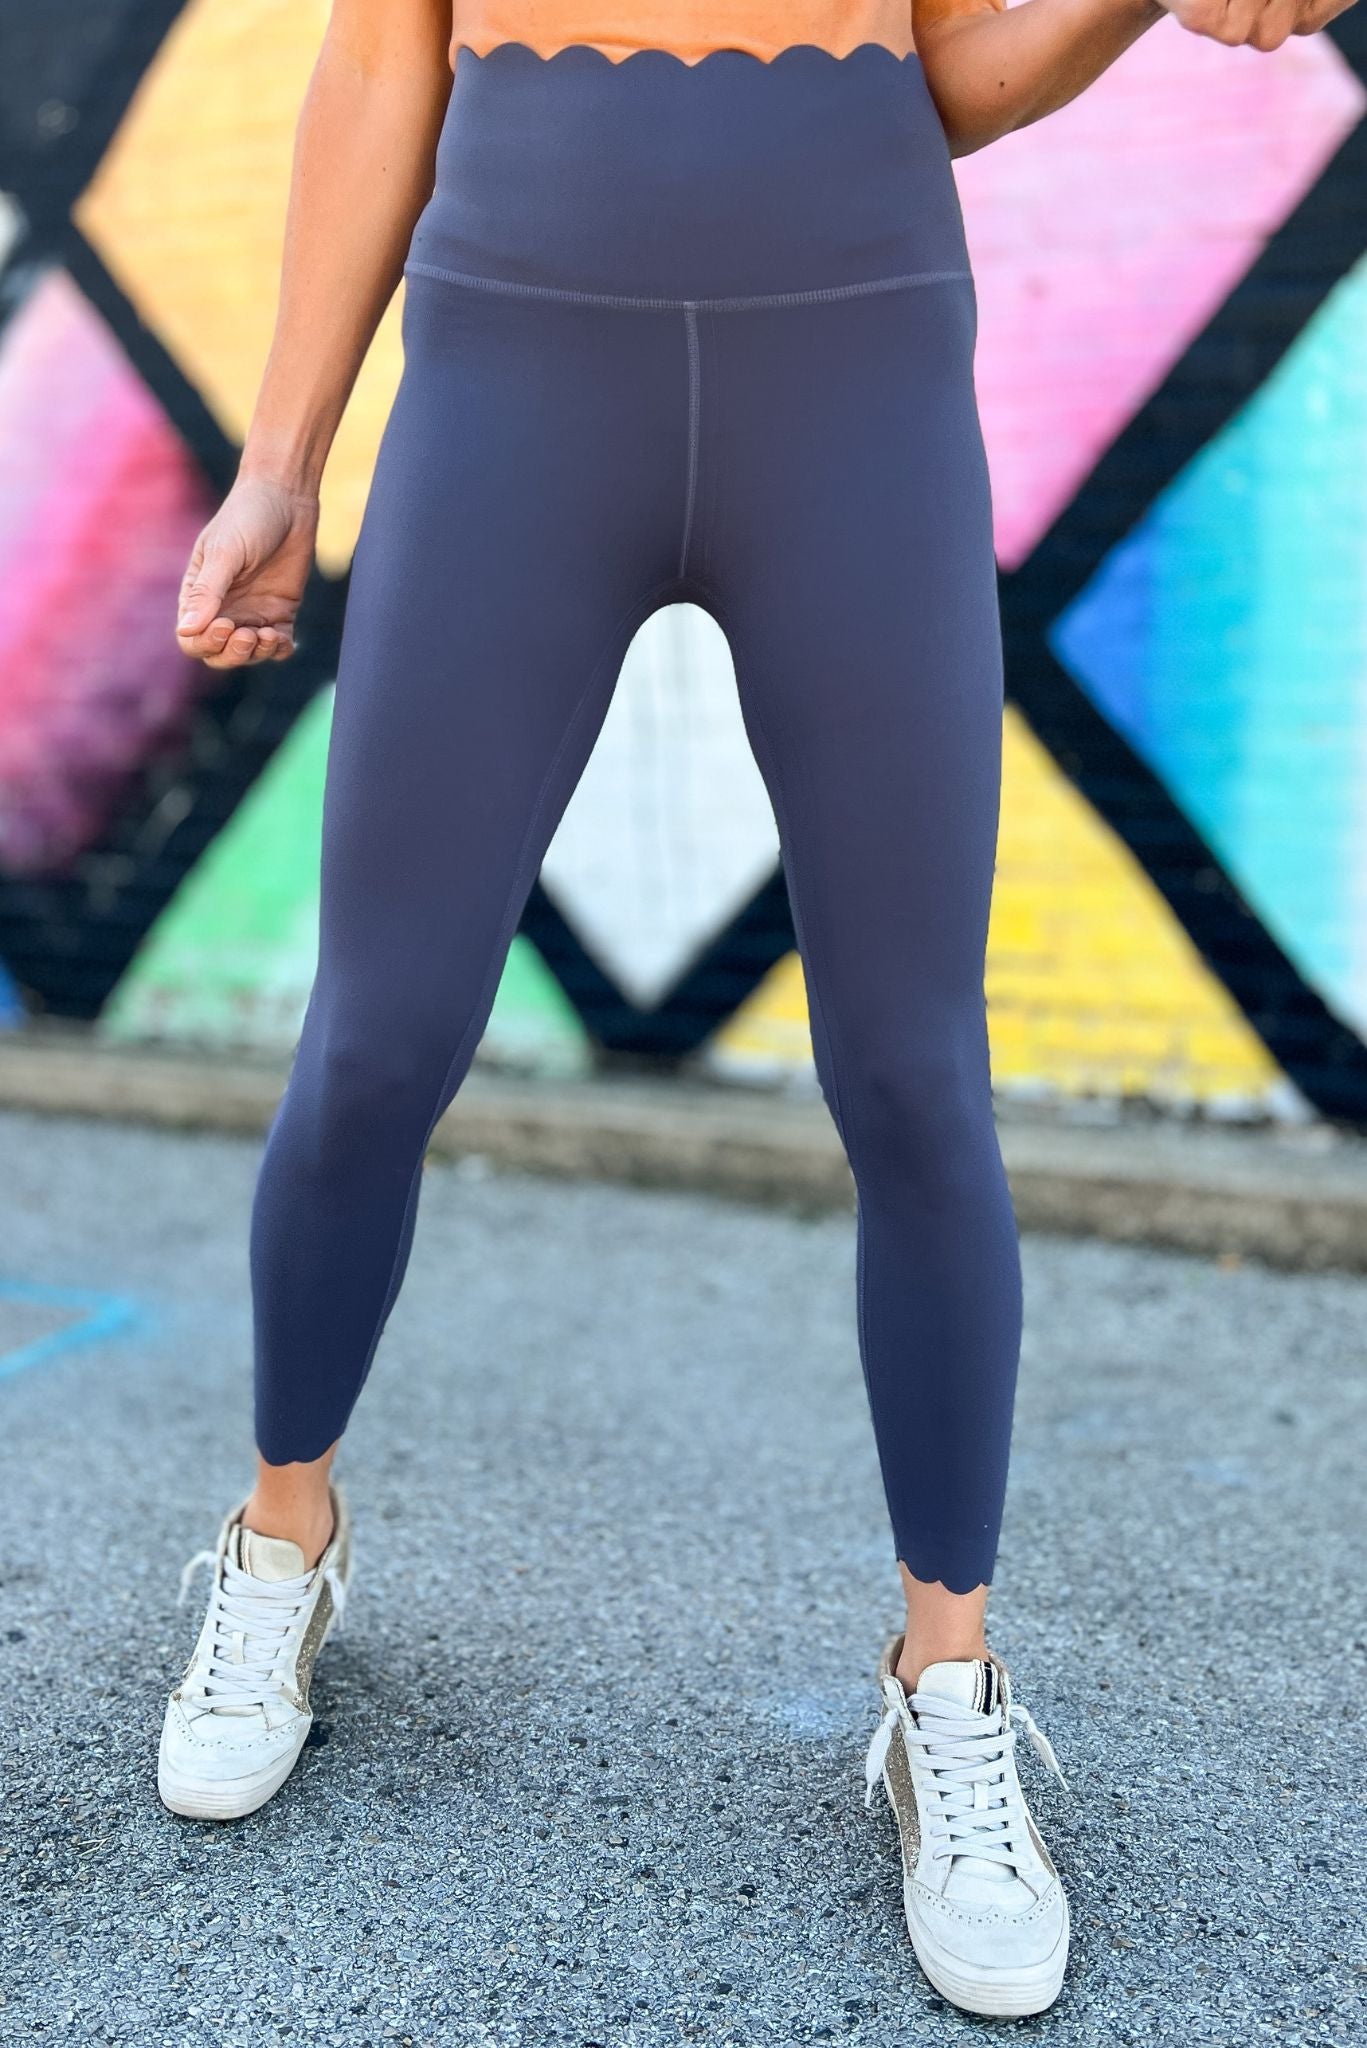 s Back Sports Bra SSYS The Label, SSYS The Label, fall fashion, atMocha Scallop Edge Criss Croshleisure, everyday wear, mom style, must have, layered look, shop style your senses by mallory fitzsimmons